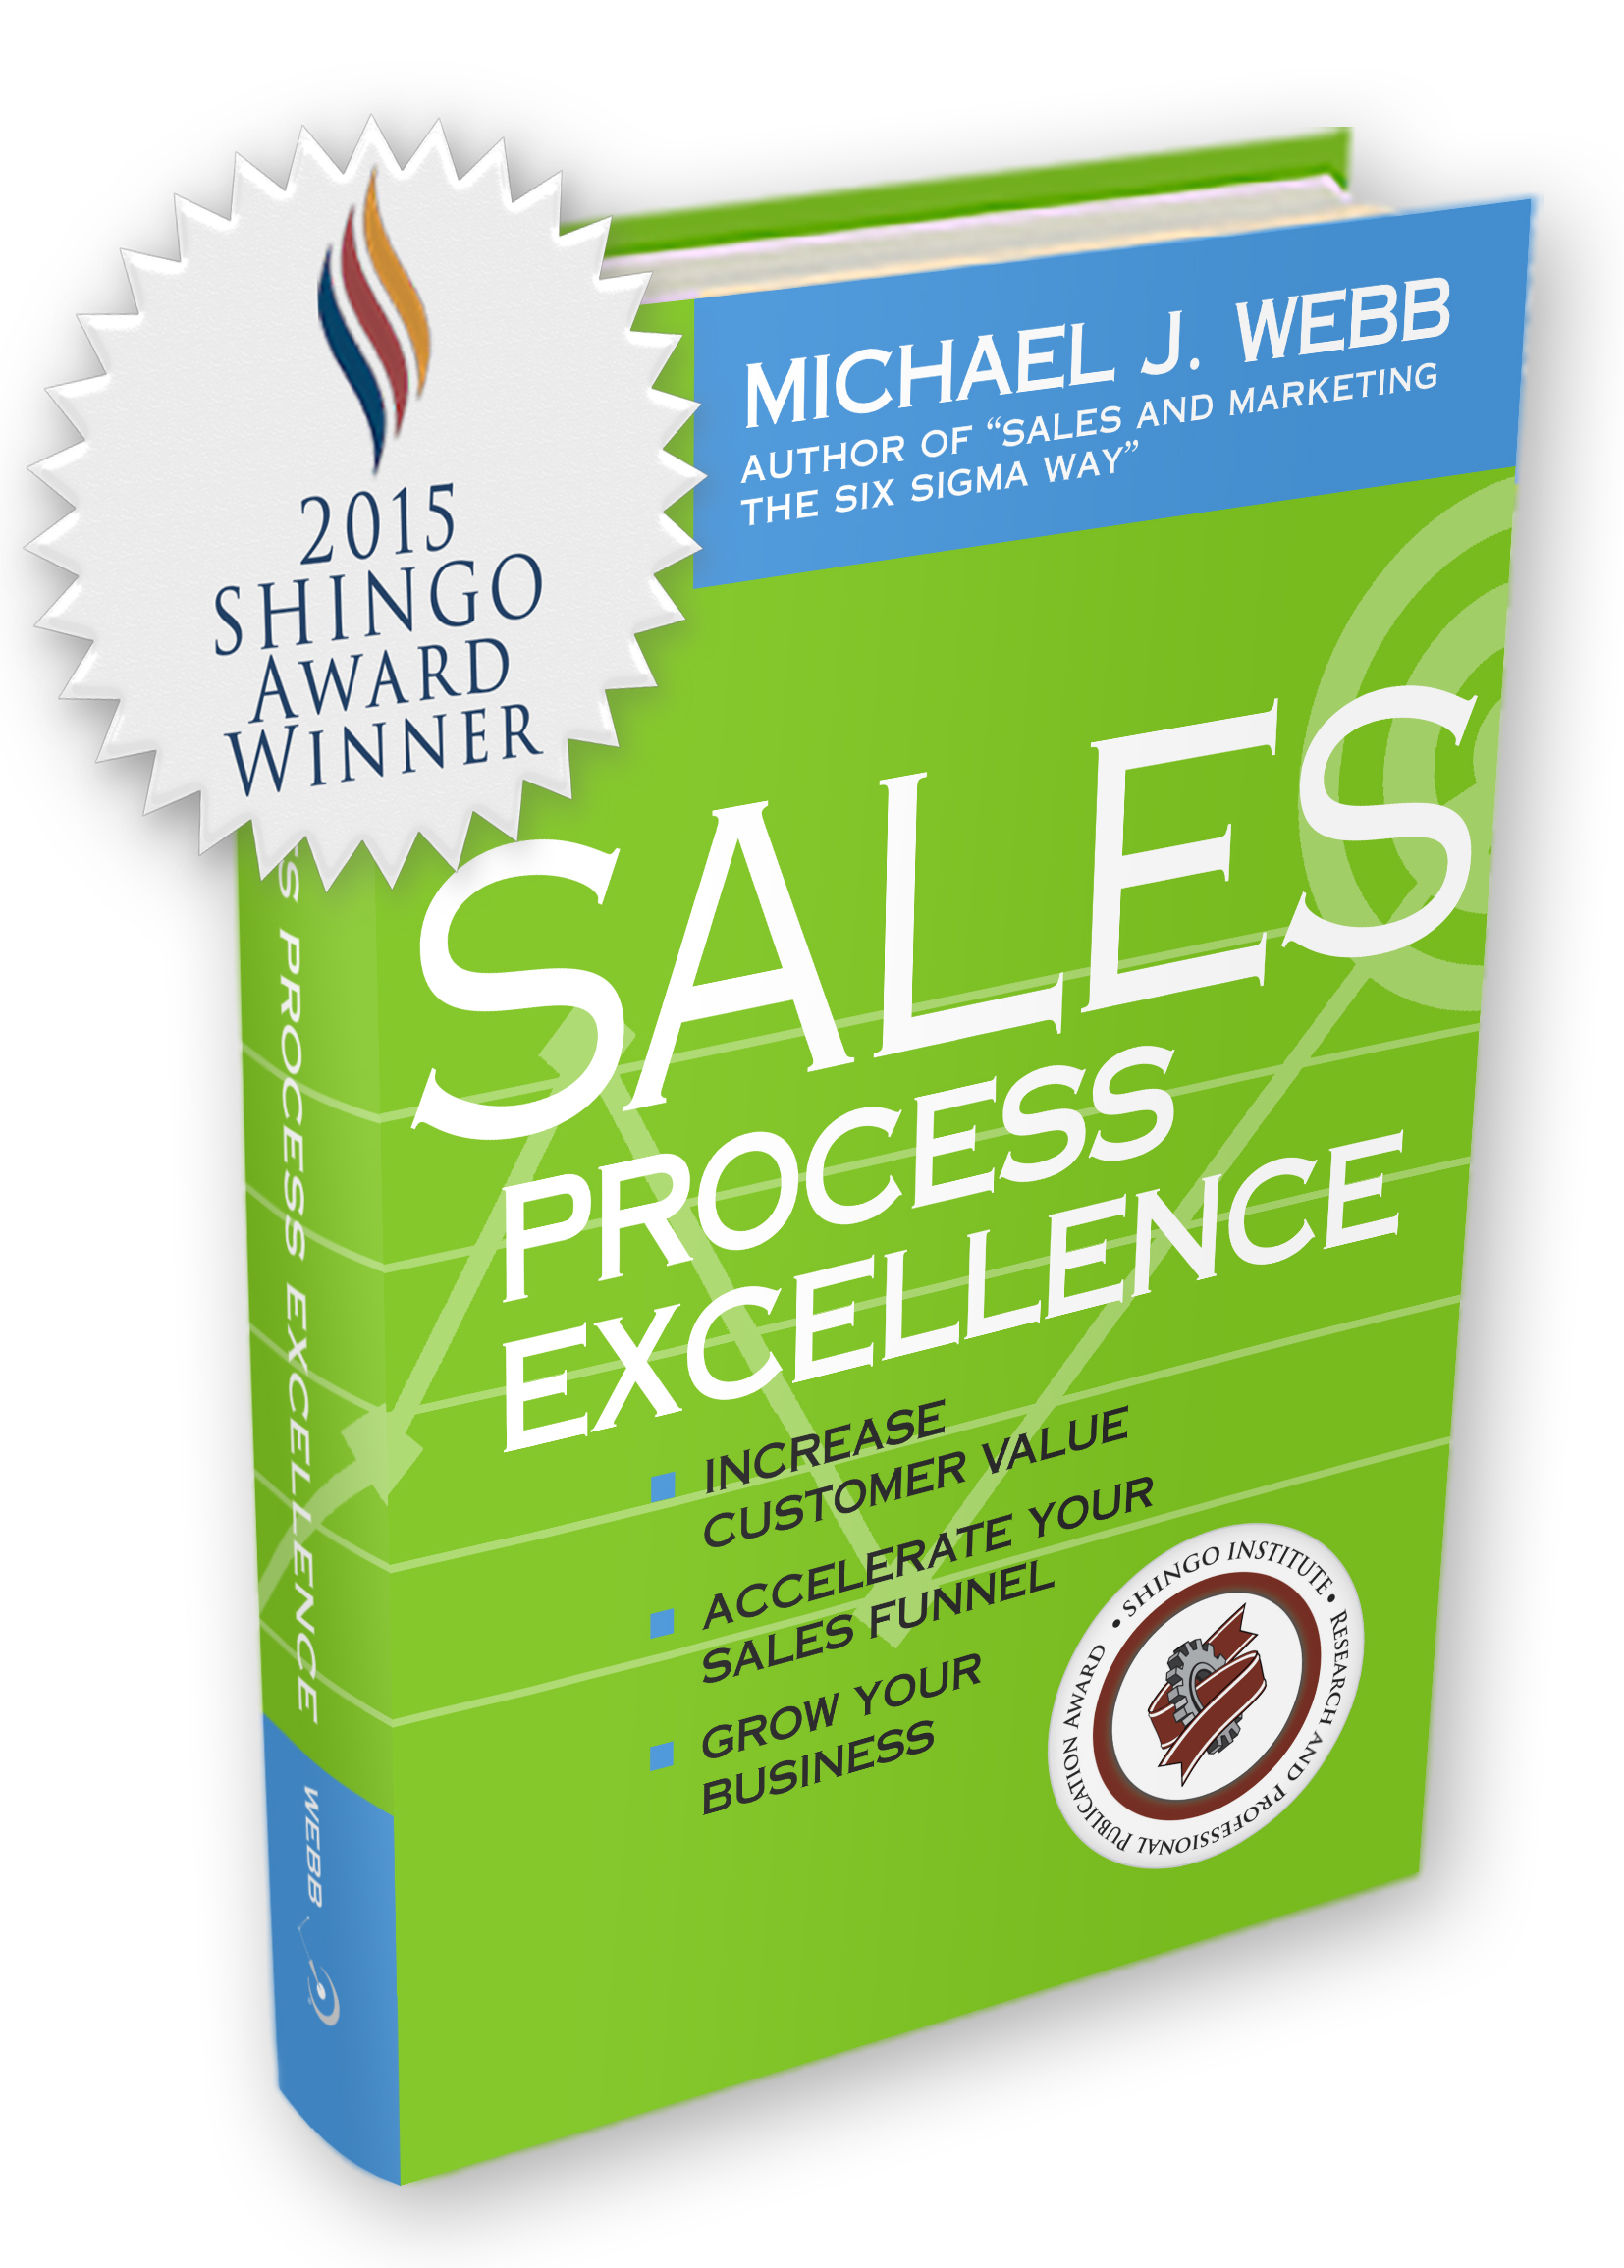 Podcast: The Art, Science + Engineering of Sales Management